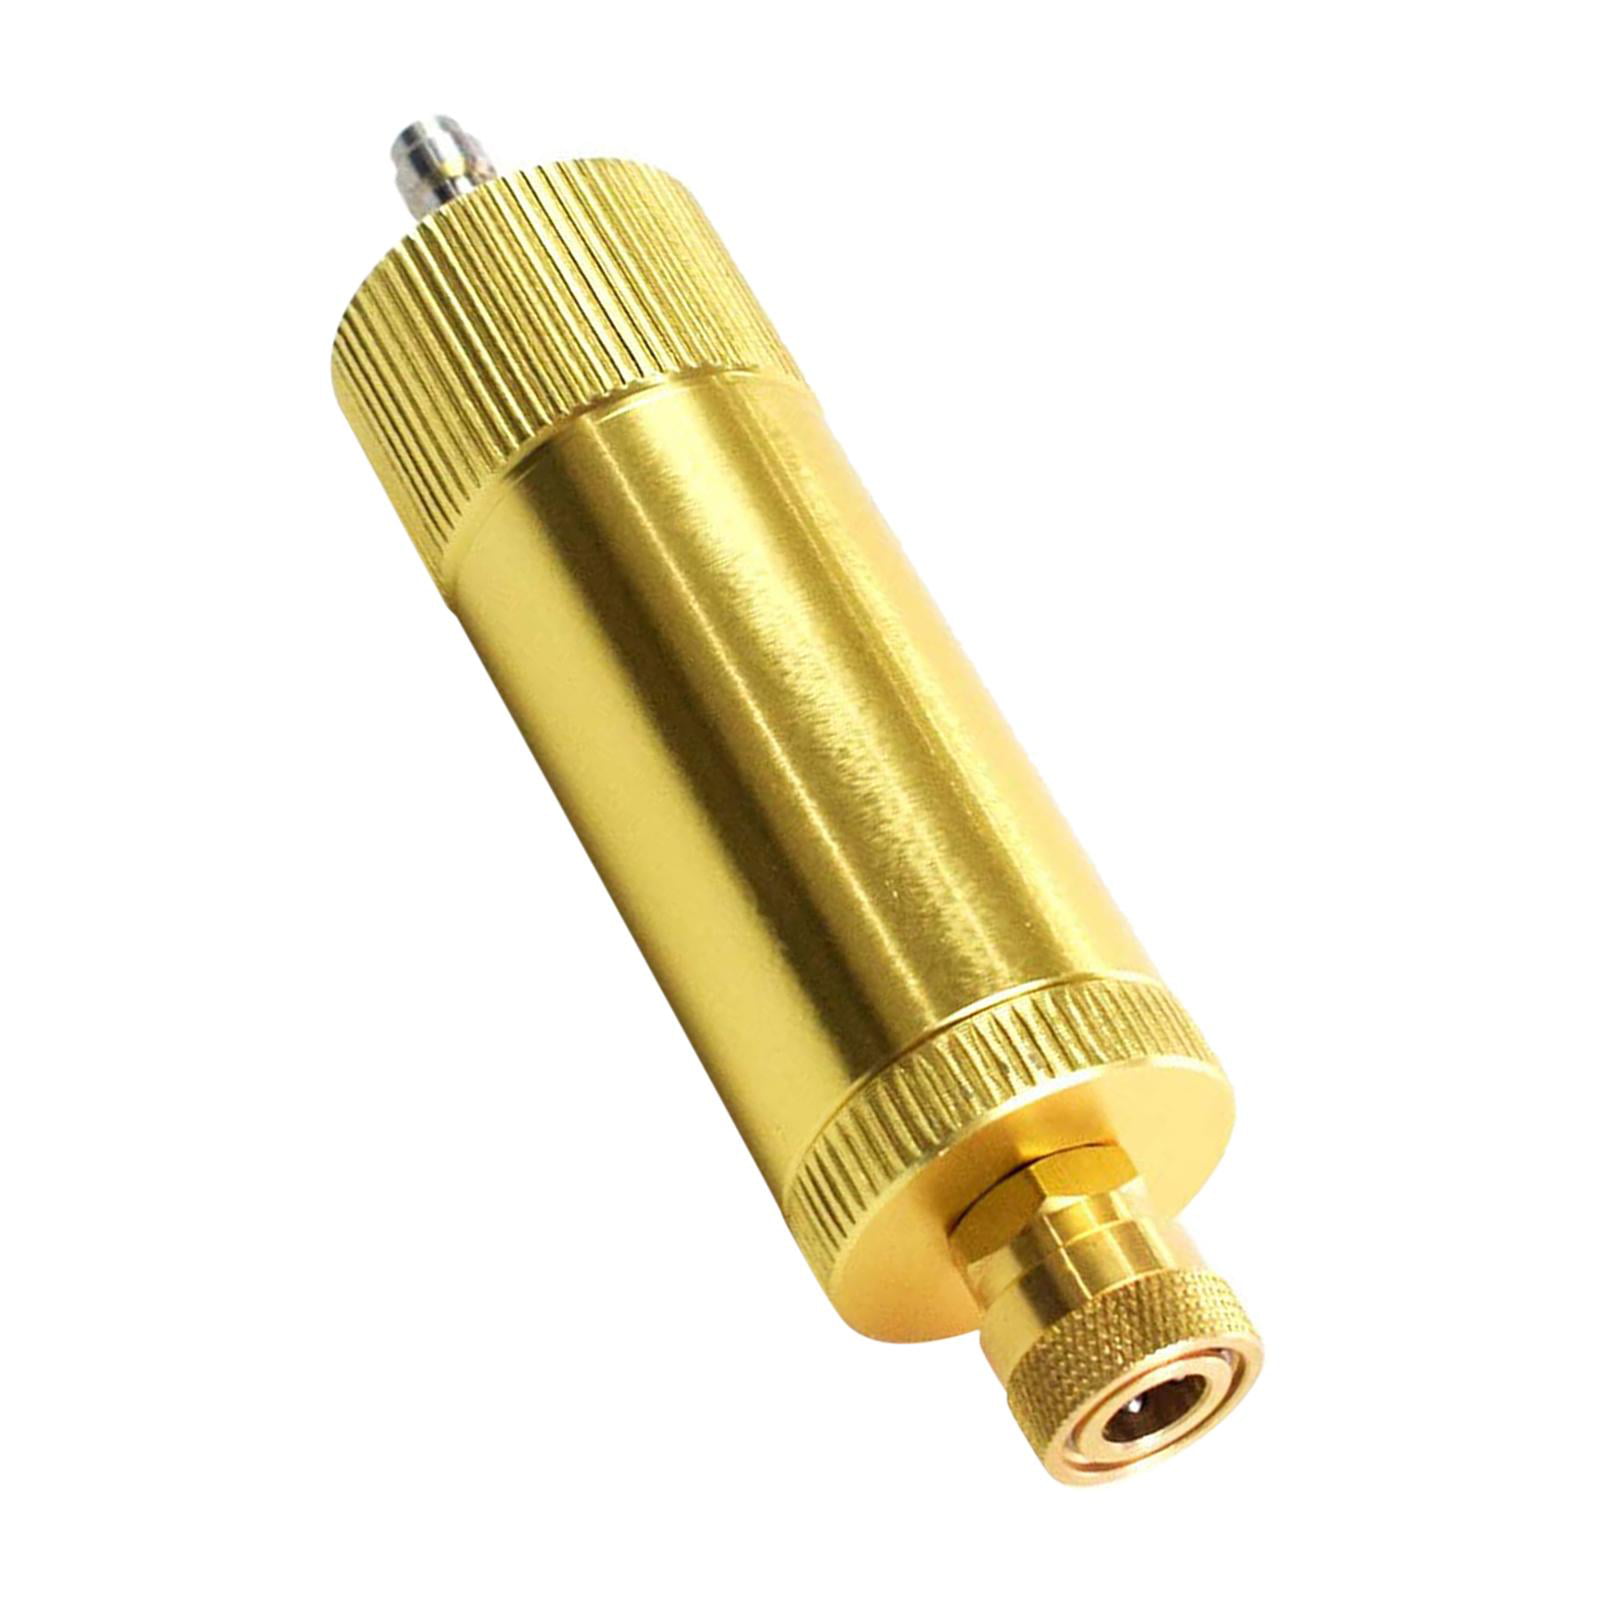 Water-Oil Sparator w/ 8MM Quick Connect  for 30MPA Air Compressor Pump hand pump 